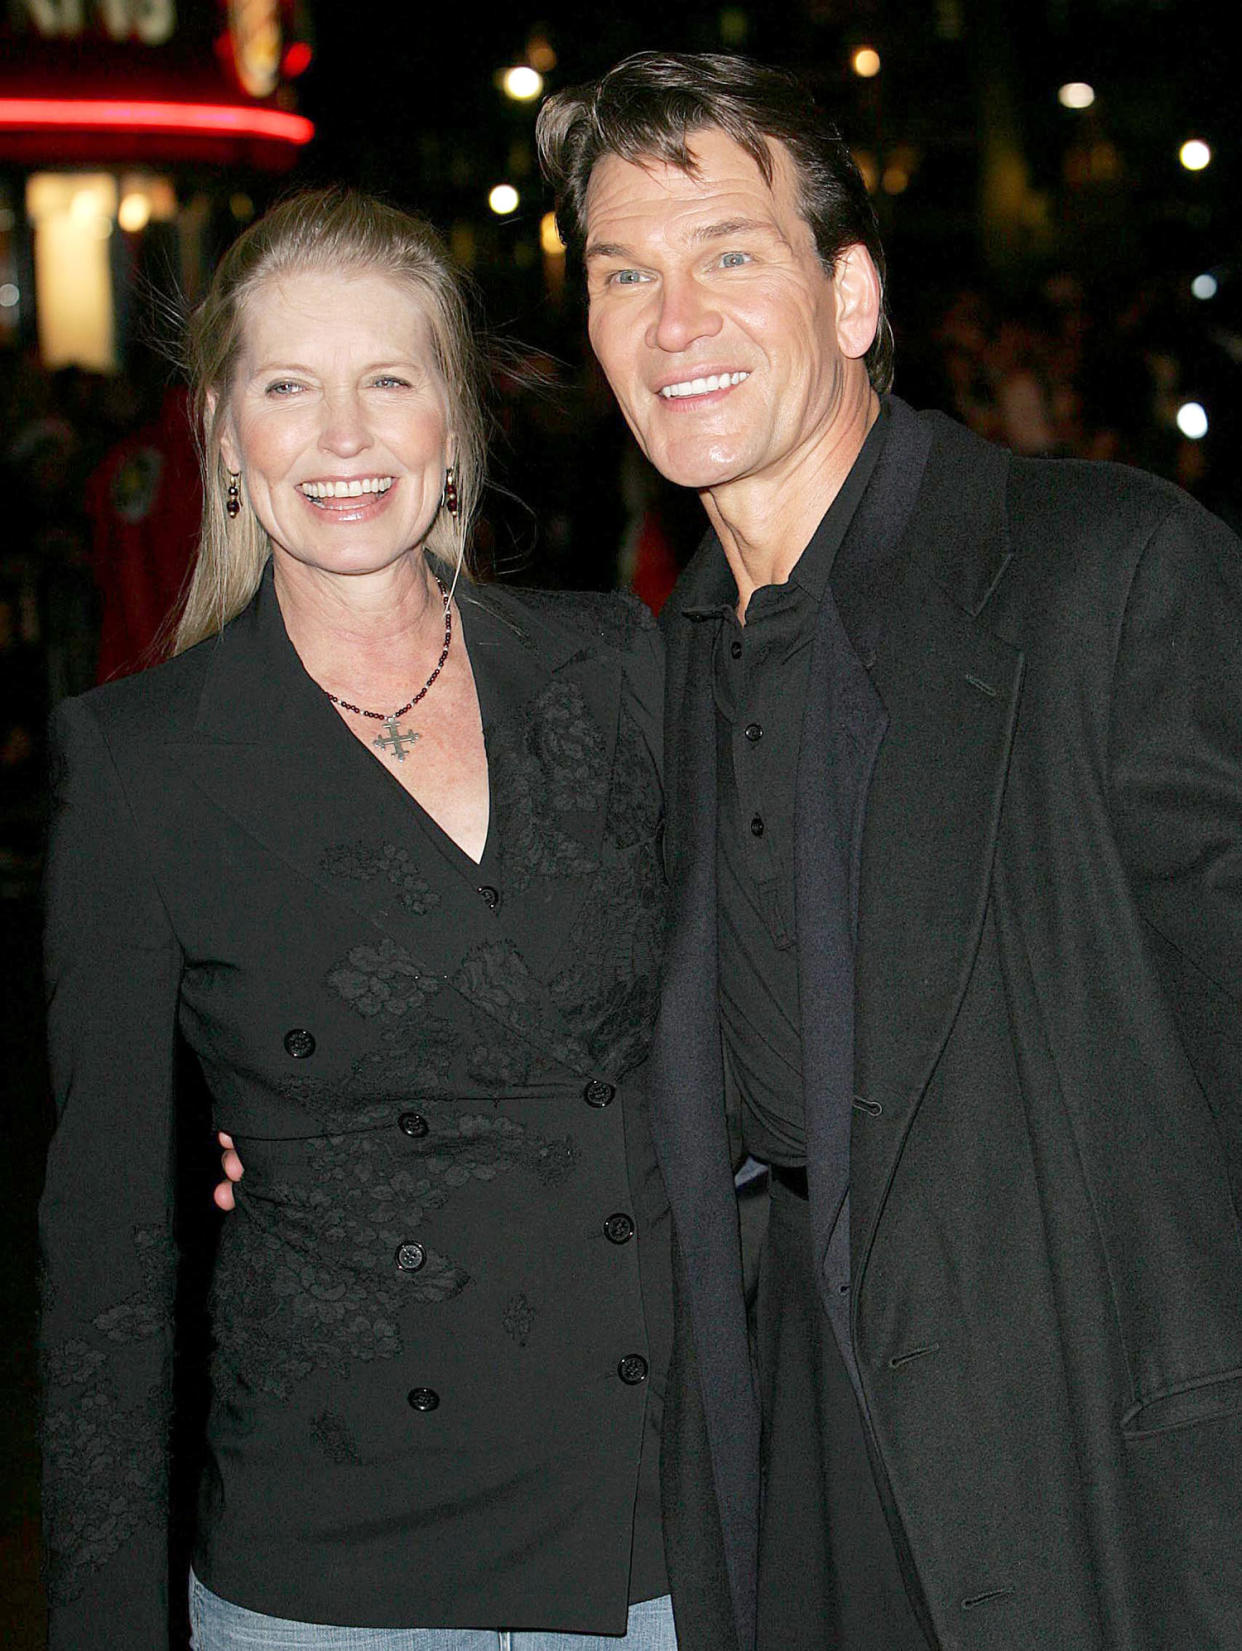 Patrick Swayze with wife Lisa Niemi at the 